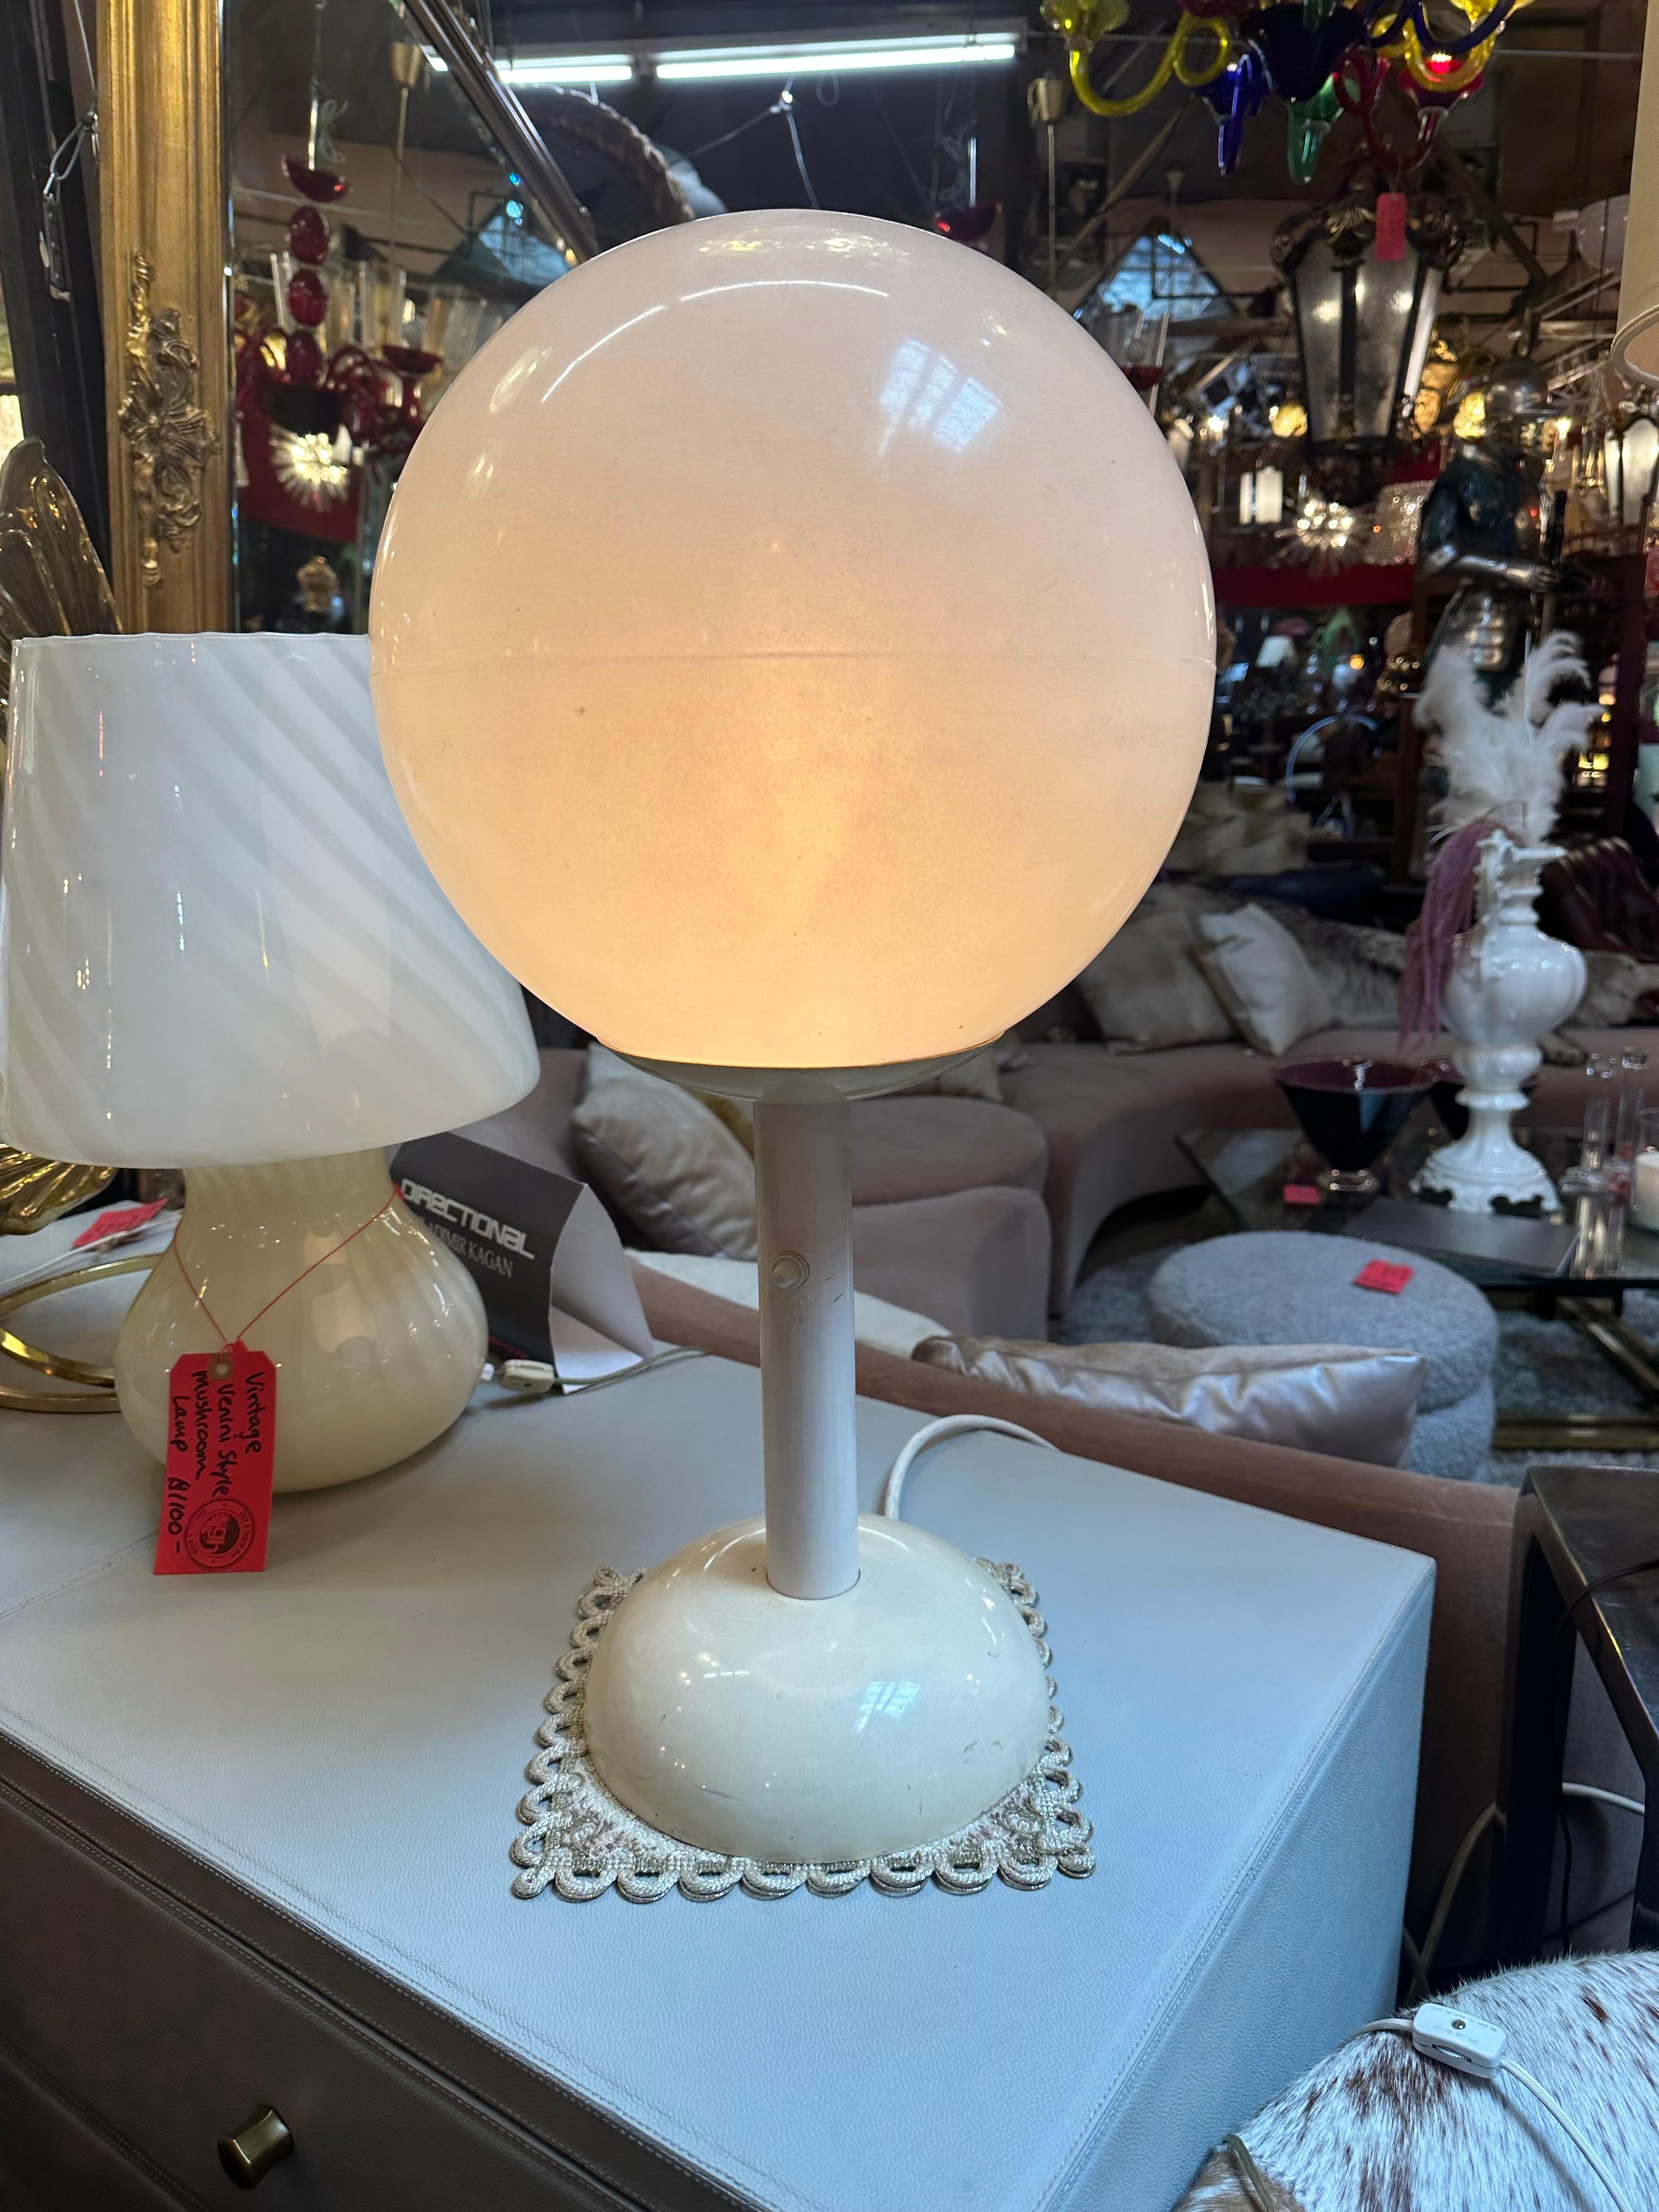 Acrylic Vintage Mid Century Modern Olympia Lunar 1 Indoor/Outdoor Globe Lamp  For Sale